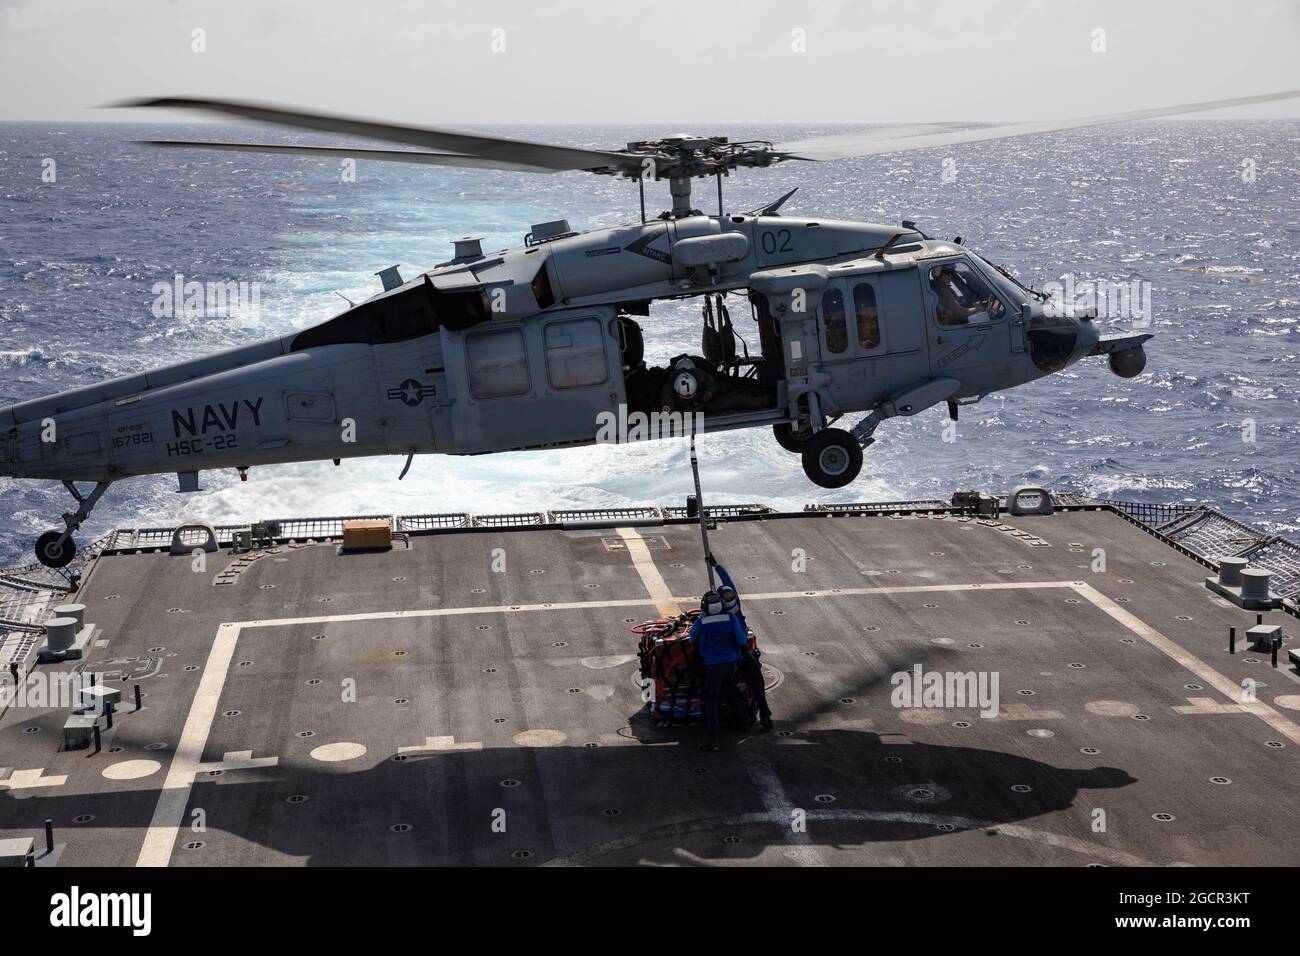 210721-N-RL695-1246   CARIBBEAN SEA - (July 21, 2021) -- Sailors assigned to the Freedom-variant littoral combat ship USS Sioux City (LCS 11) attach a cargo load of 575 kilograms of suspected contraband to an MH-60S Seahawk helicopter attached to the “Sea Knights” of Helicopter Sea Combat Squadron (HSC) 22, Detachment 3, for transfer to the Freedom-variant littoral combat ship USS Billings (LCS 15), July 21, 2021. Sioux City is deployed to the U.S. 4th Fleet area of operations to support Joint Interagency Task Force South’s mission, which includes counter-illicit drug trafficking missions in t Stock Photo